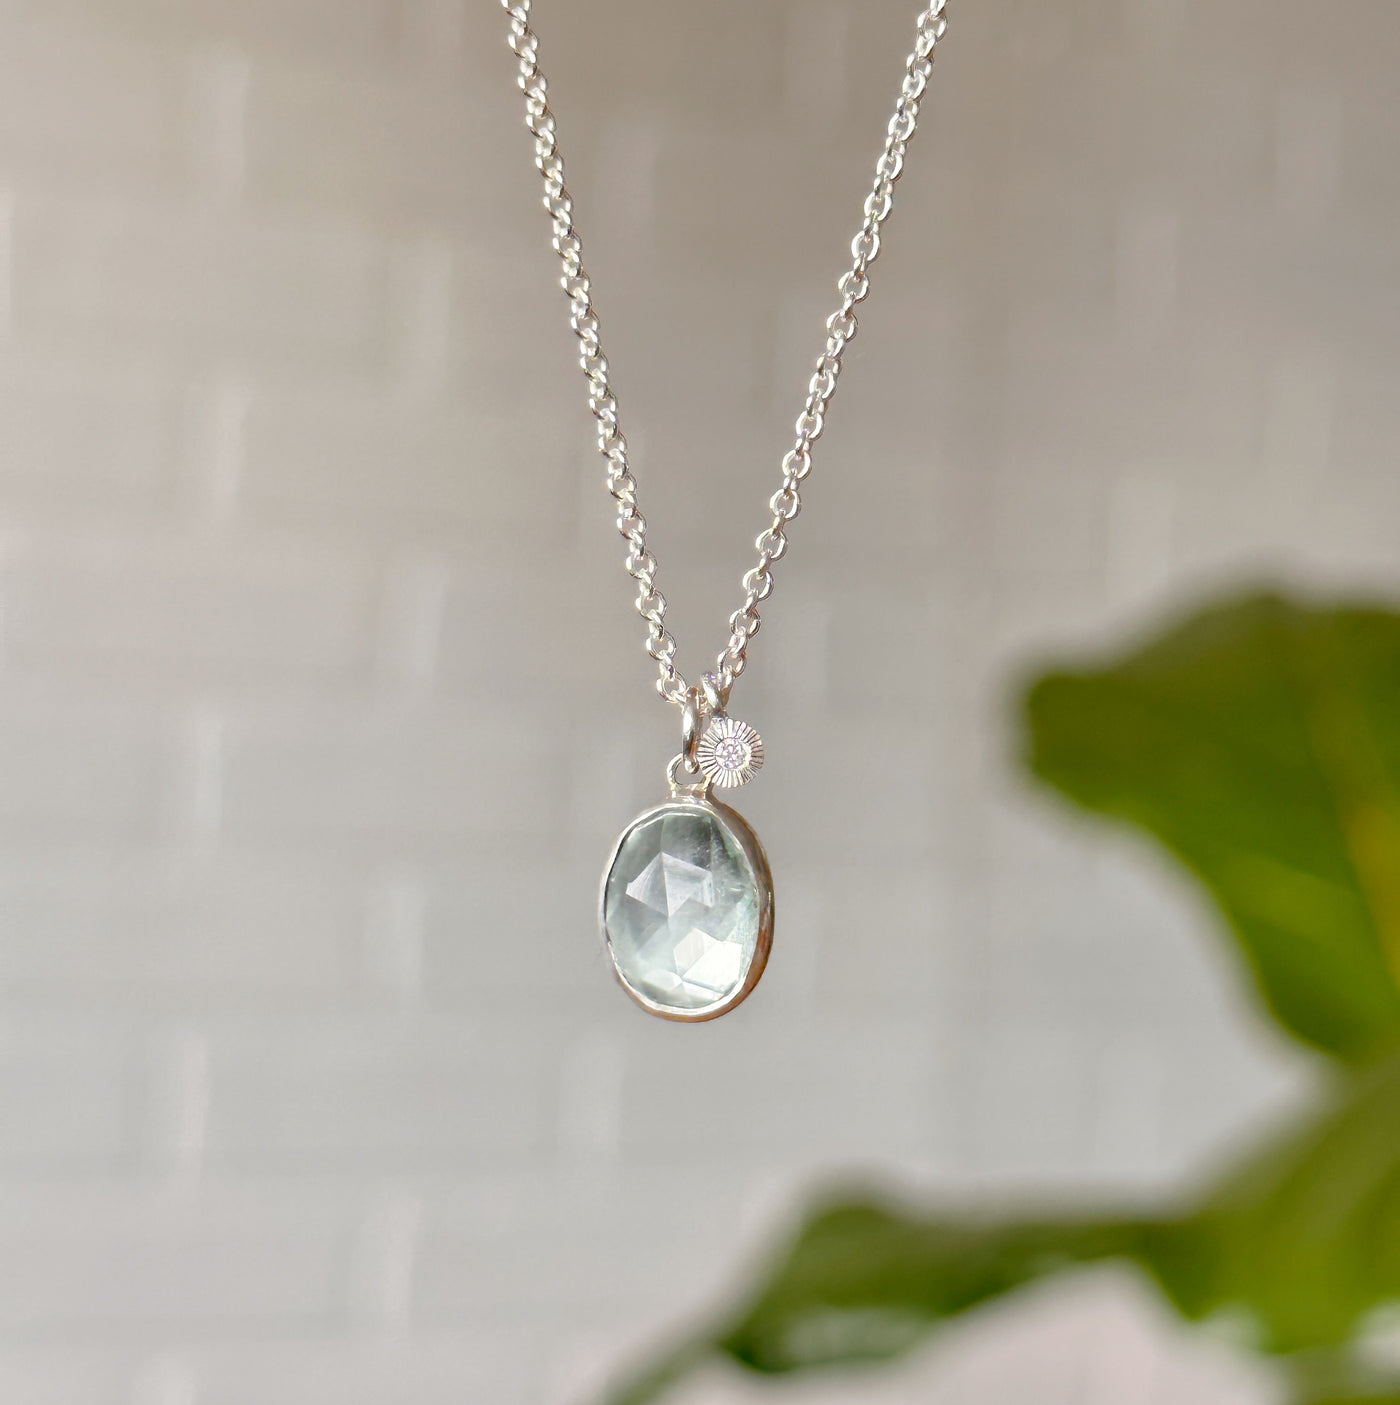 Aquamarine and diamond necklace with silver bezel hanging from a chain in front of a white wall, front angle